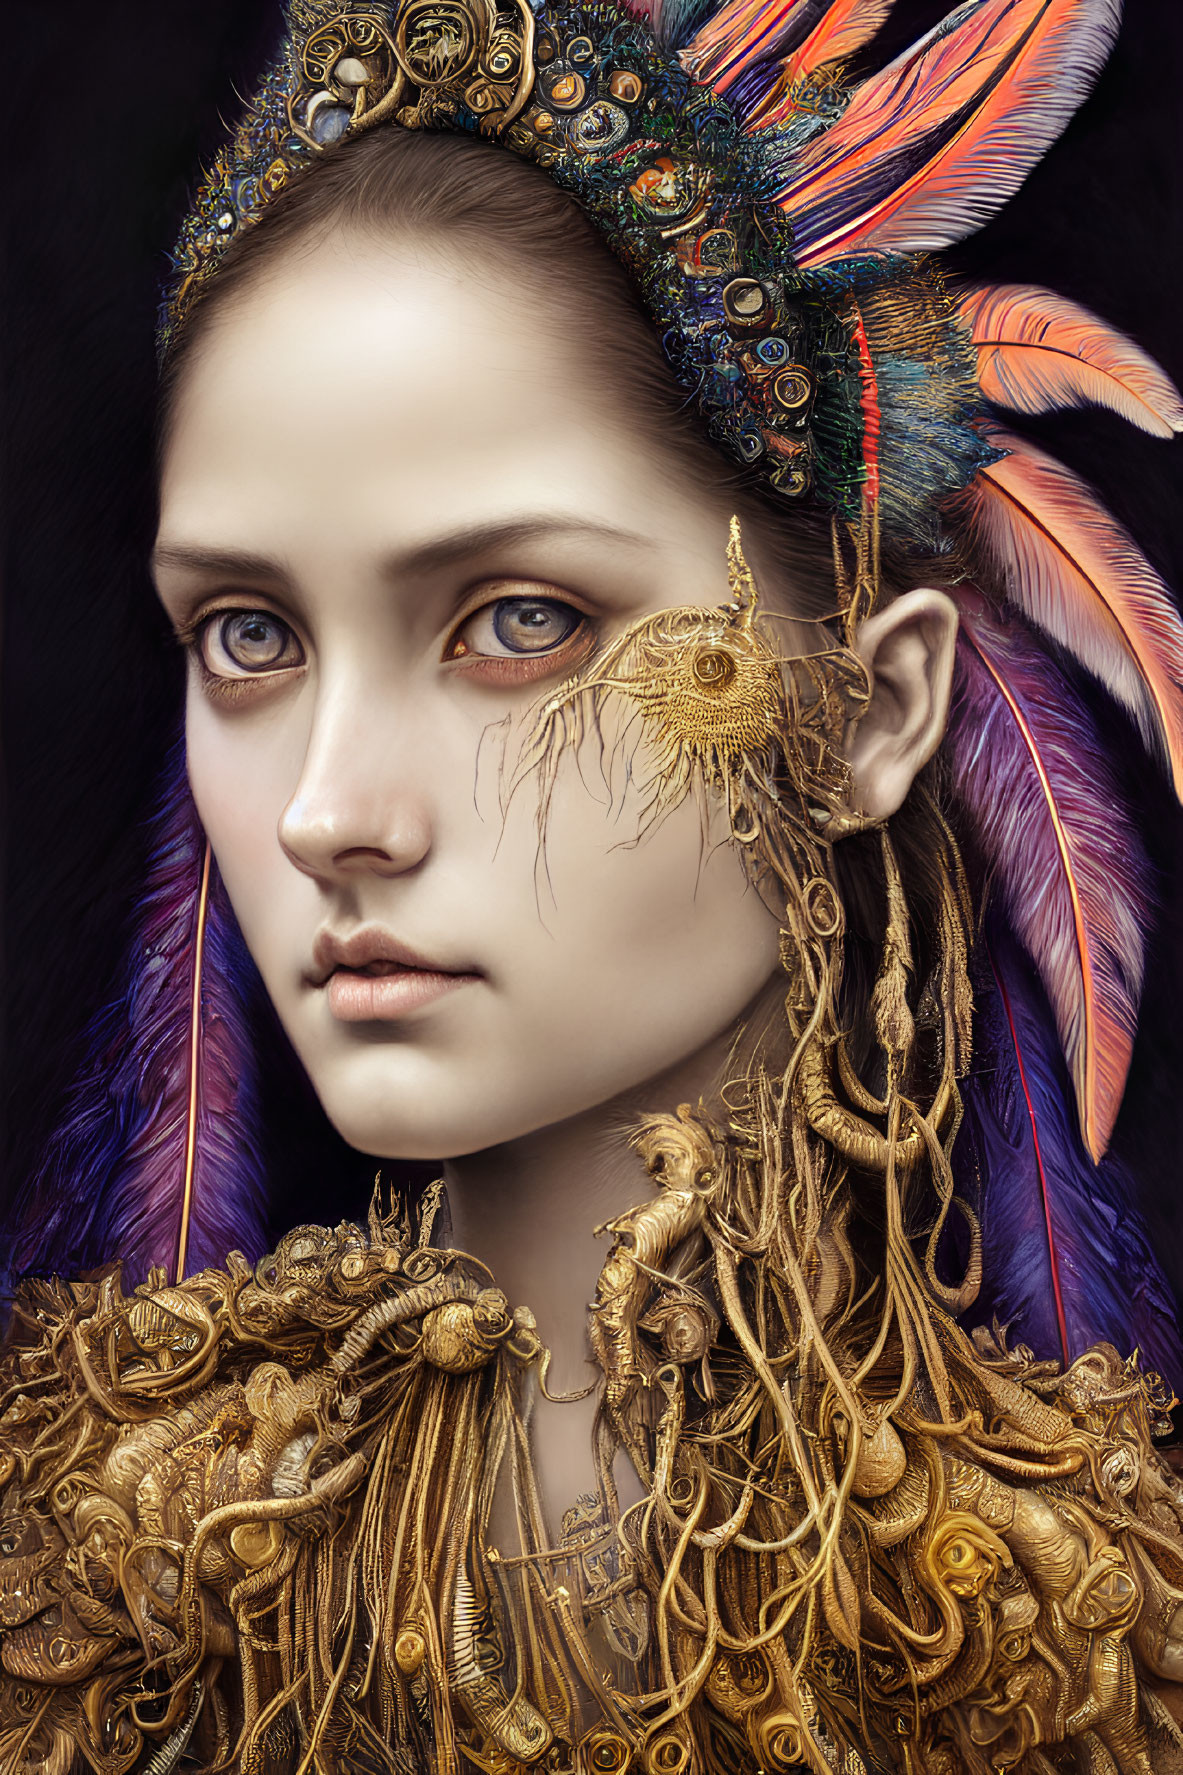 Portrait of Woman with Ornate Gold Jewelry and Feathered Headdress